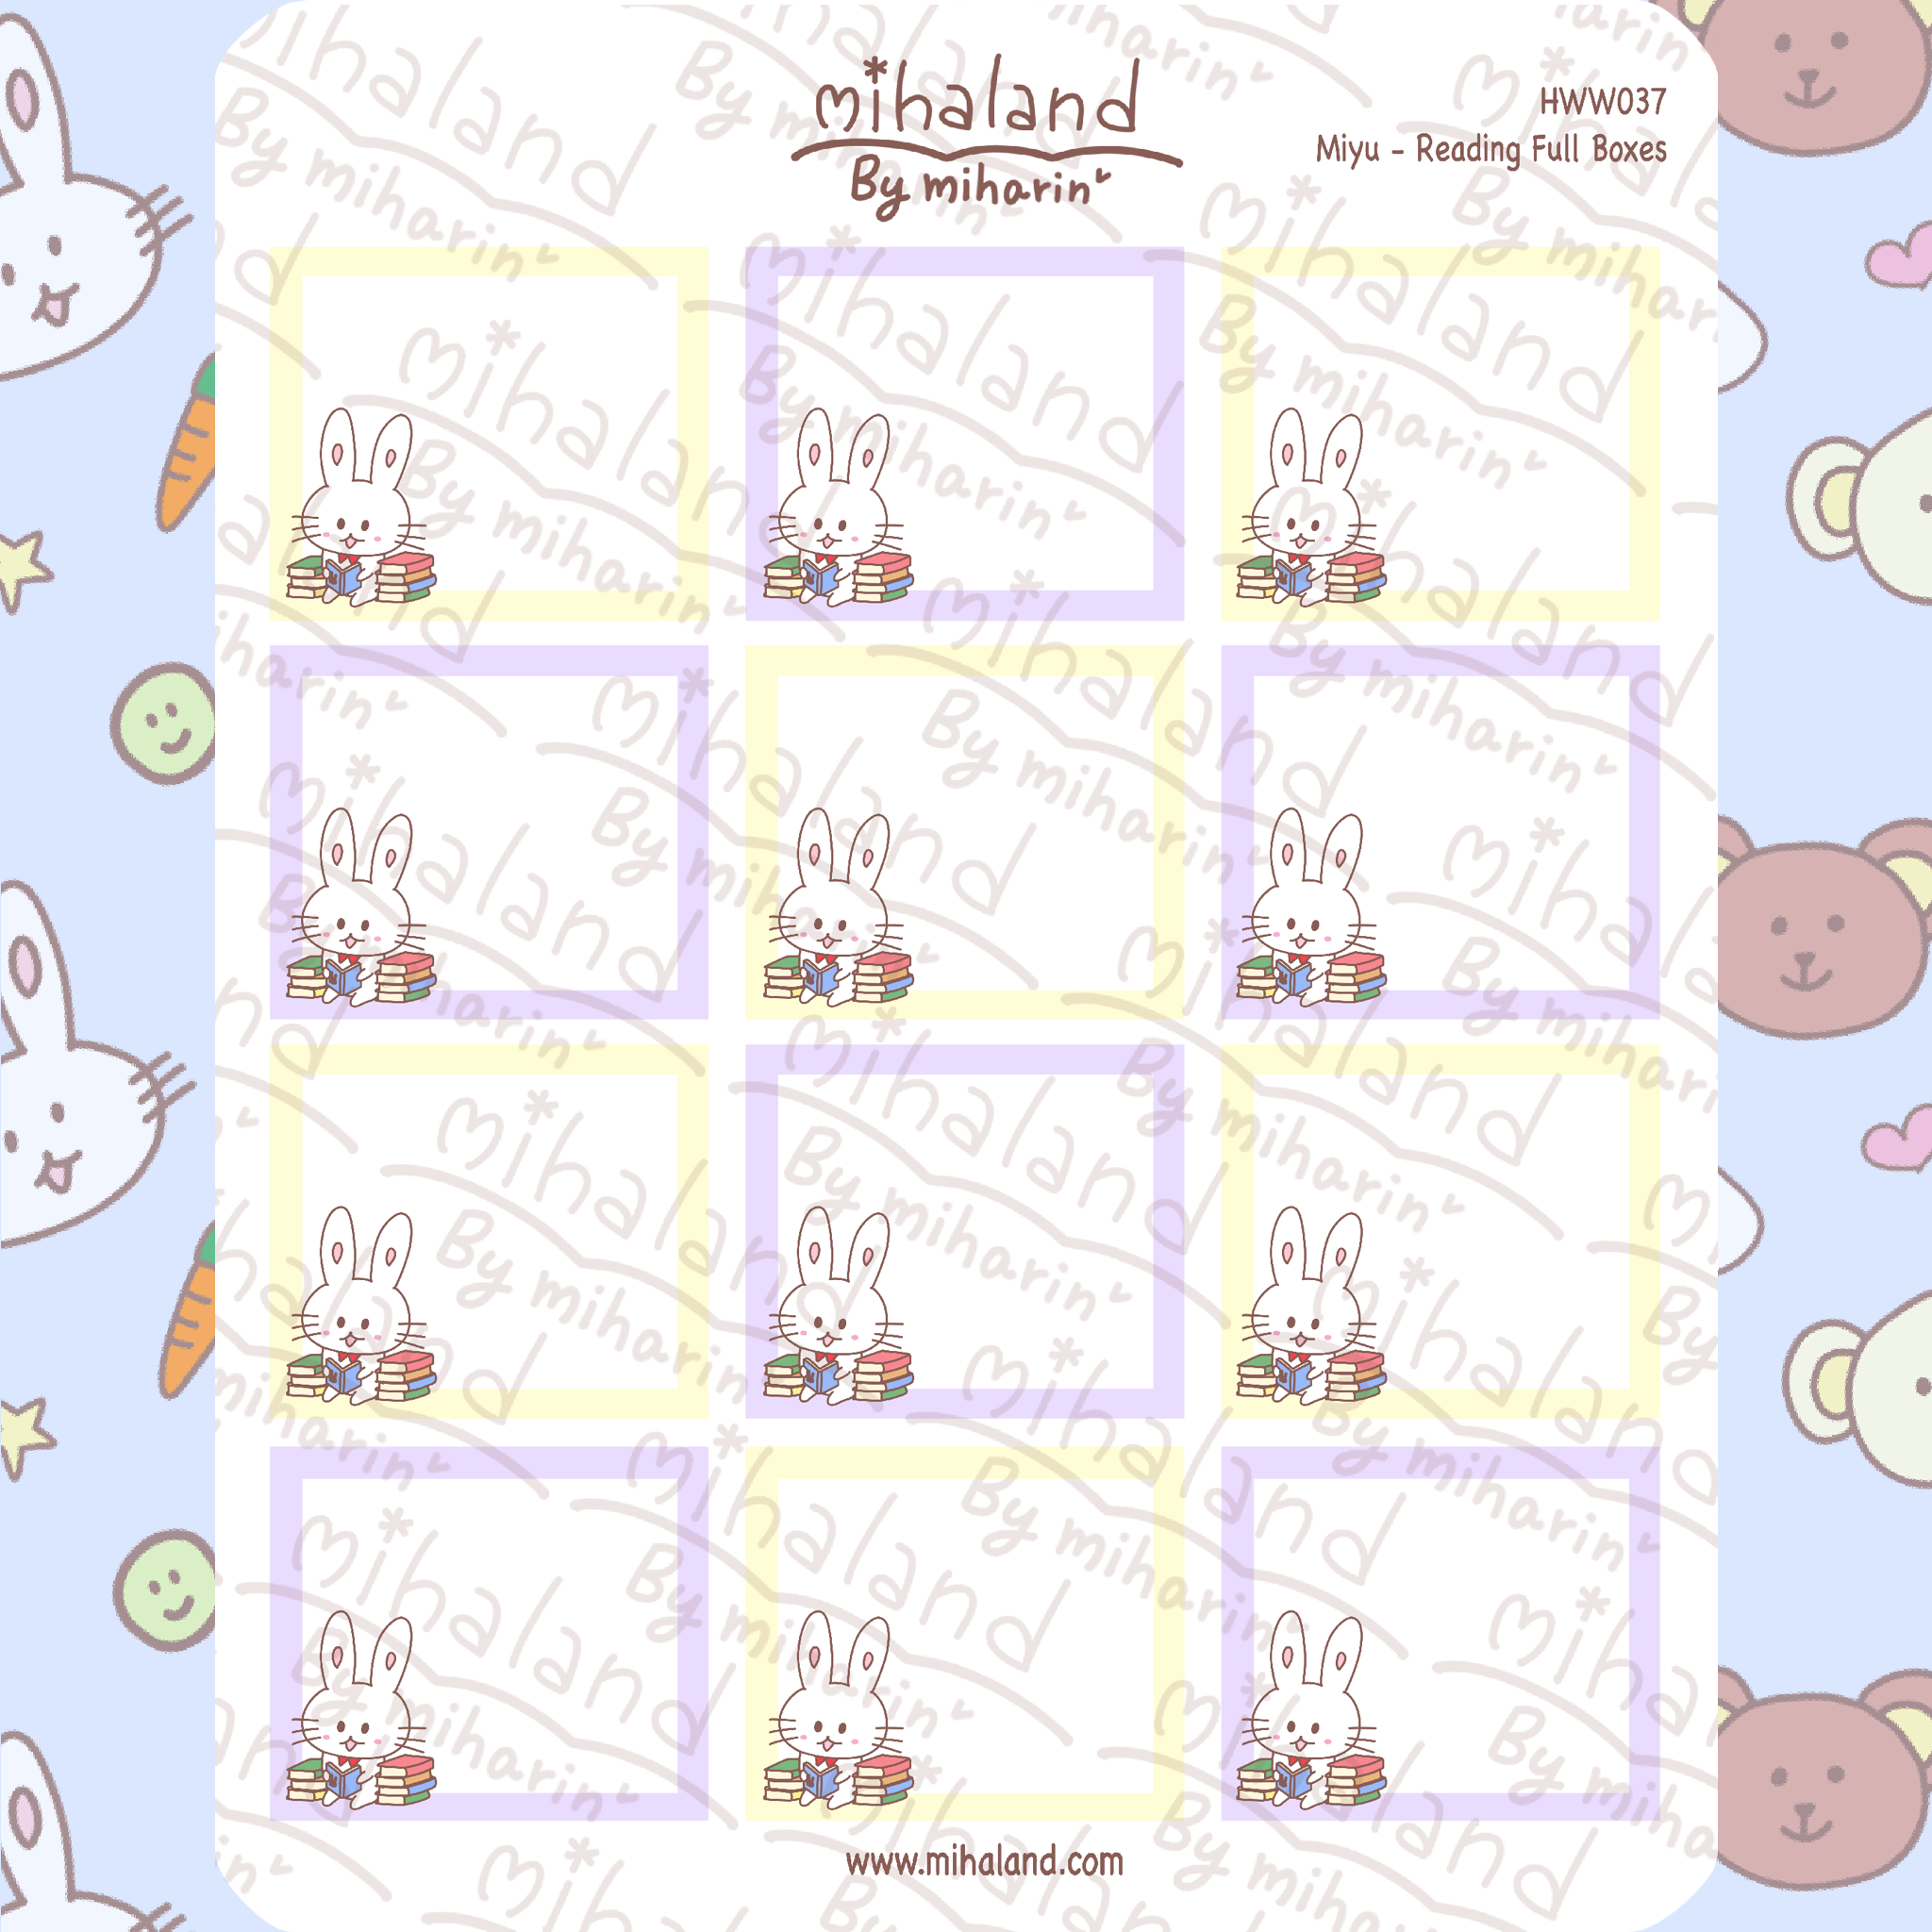 Miyu - Reading Full Boxes for Hobonichi Weeks Planner Stickers (HWW037)